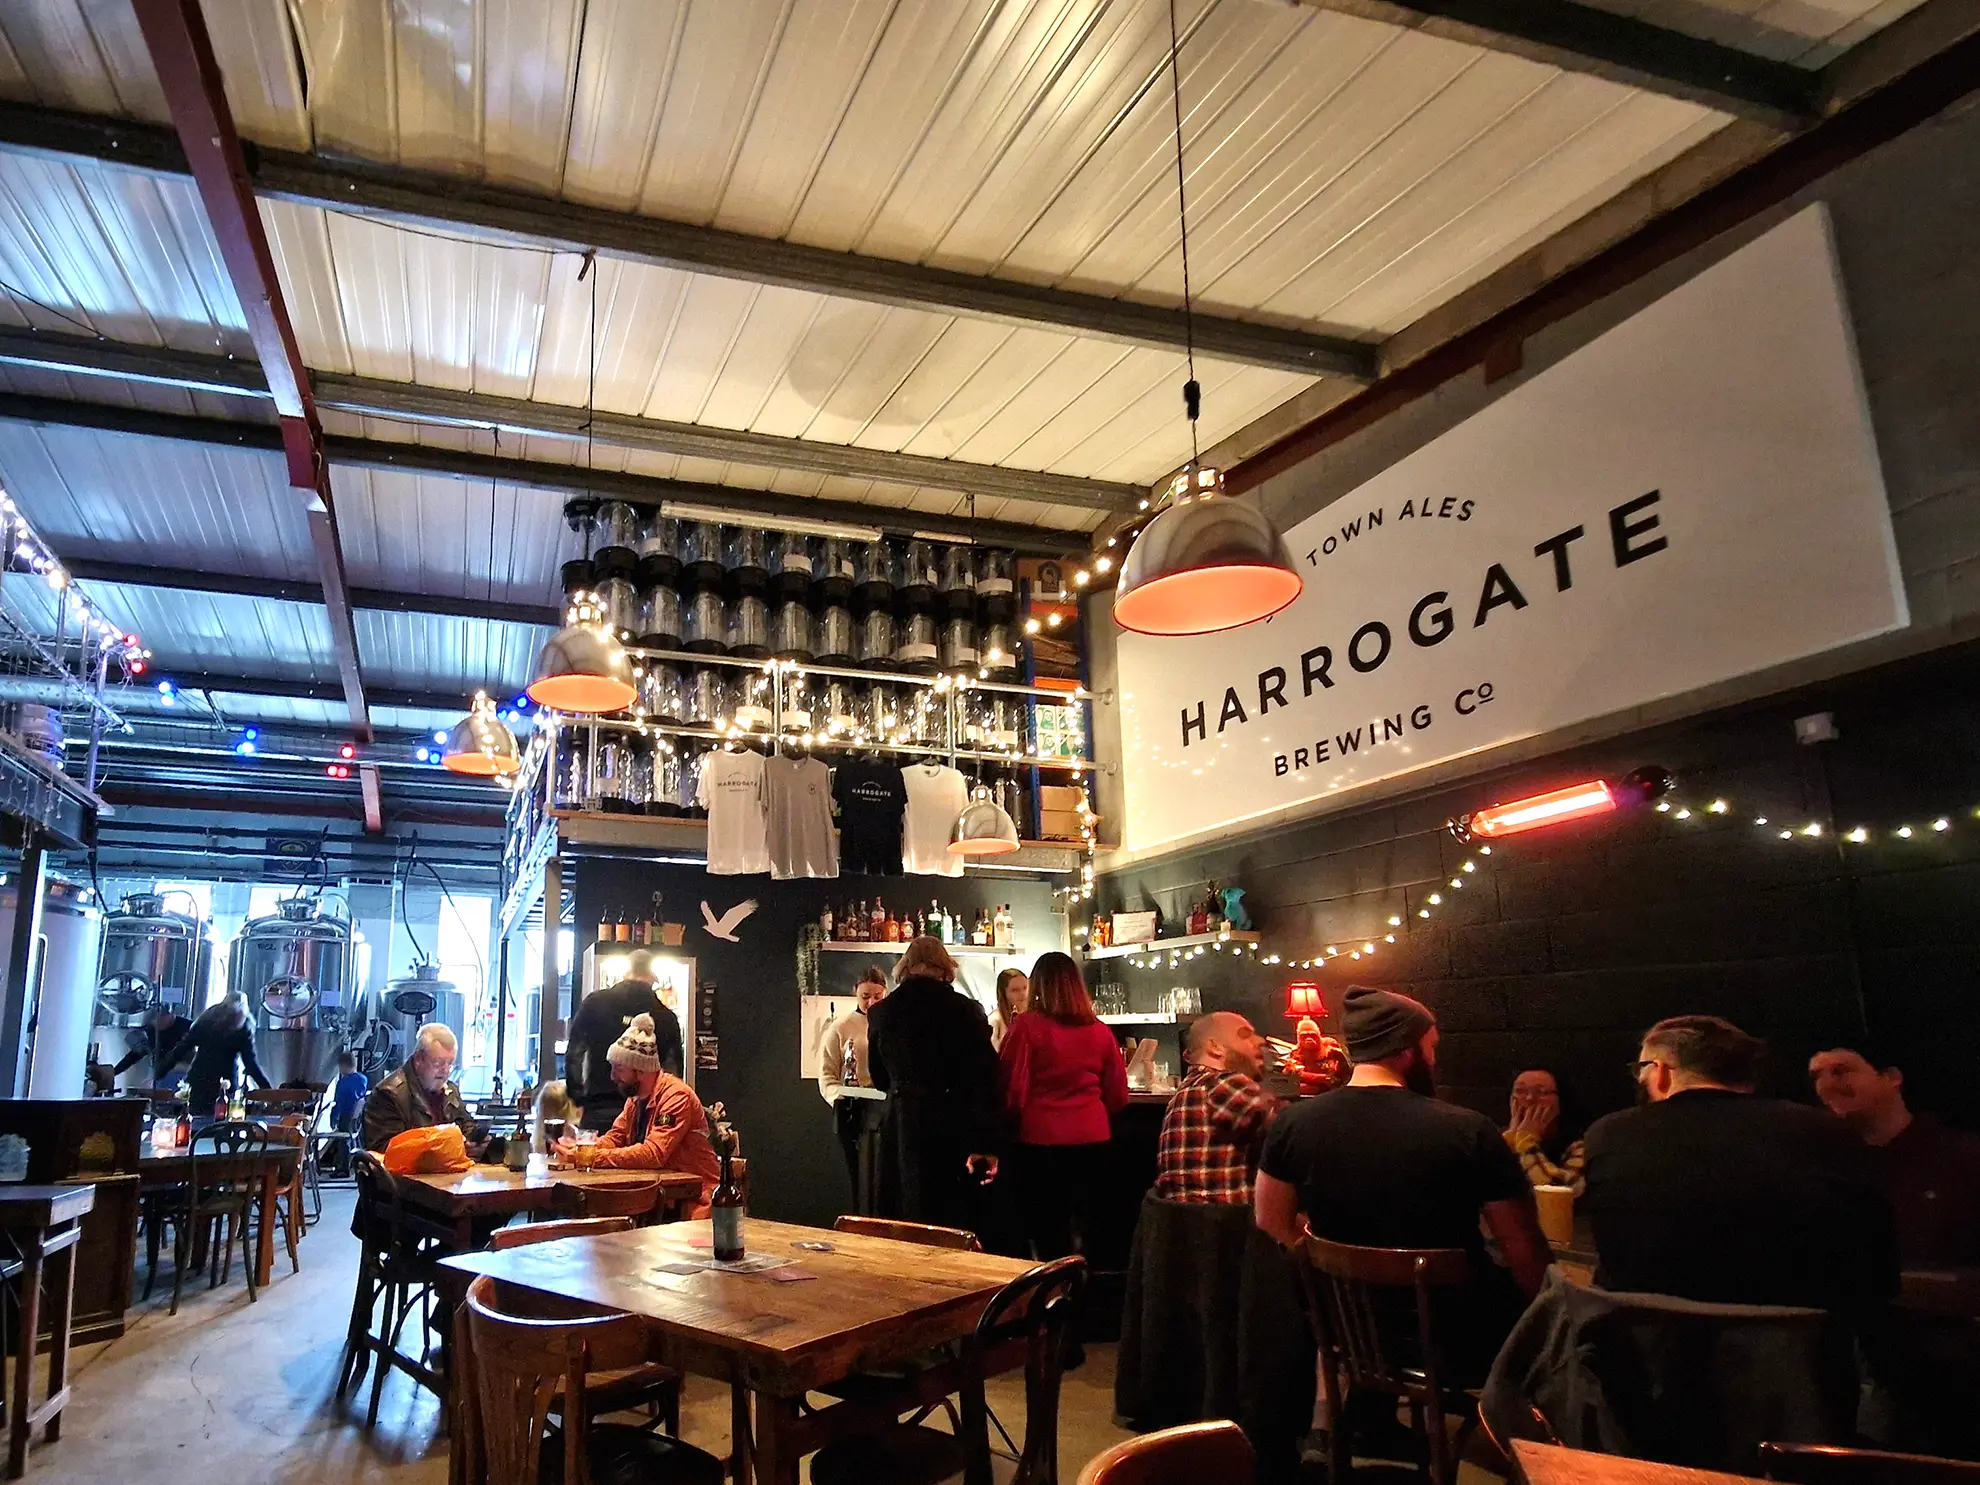 You are currently viewing Harrogate Brewery Taproom